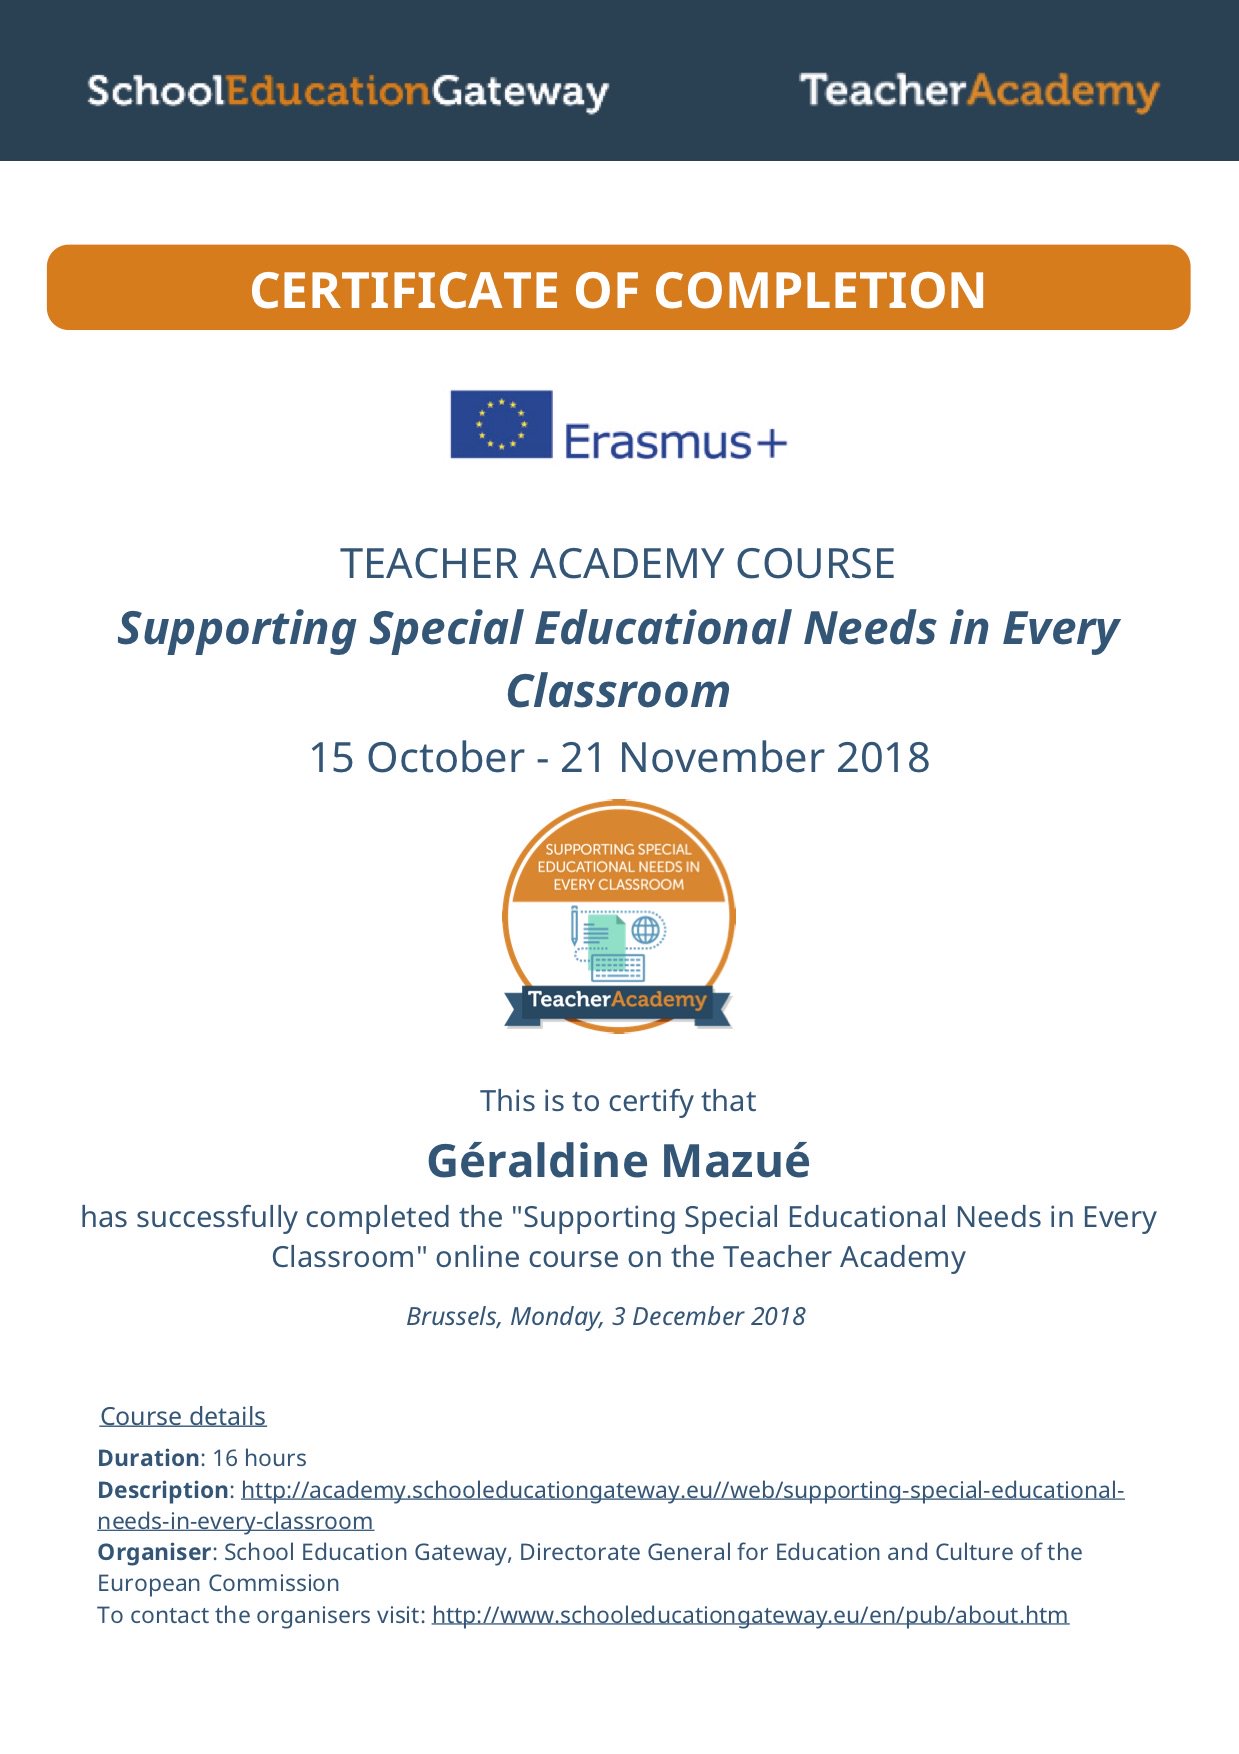 Geraldine Mazue On Twitter Supporting Special Educational Needs